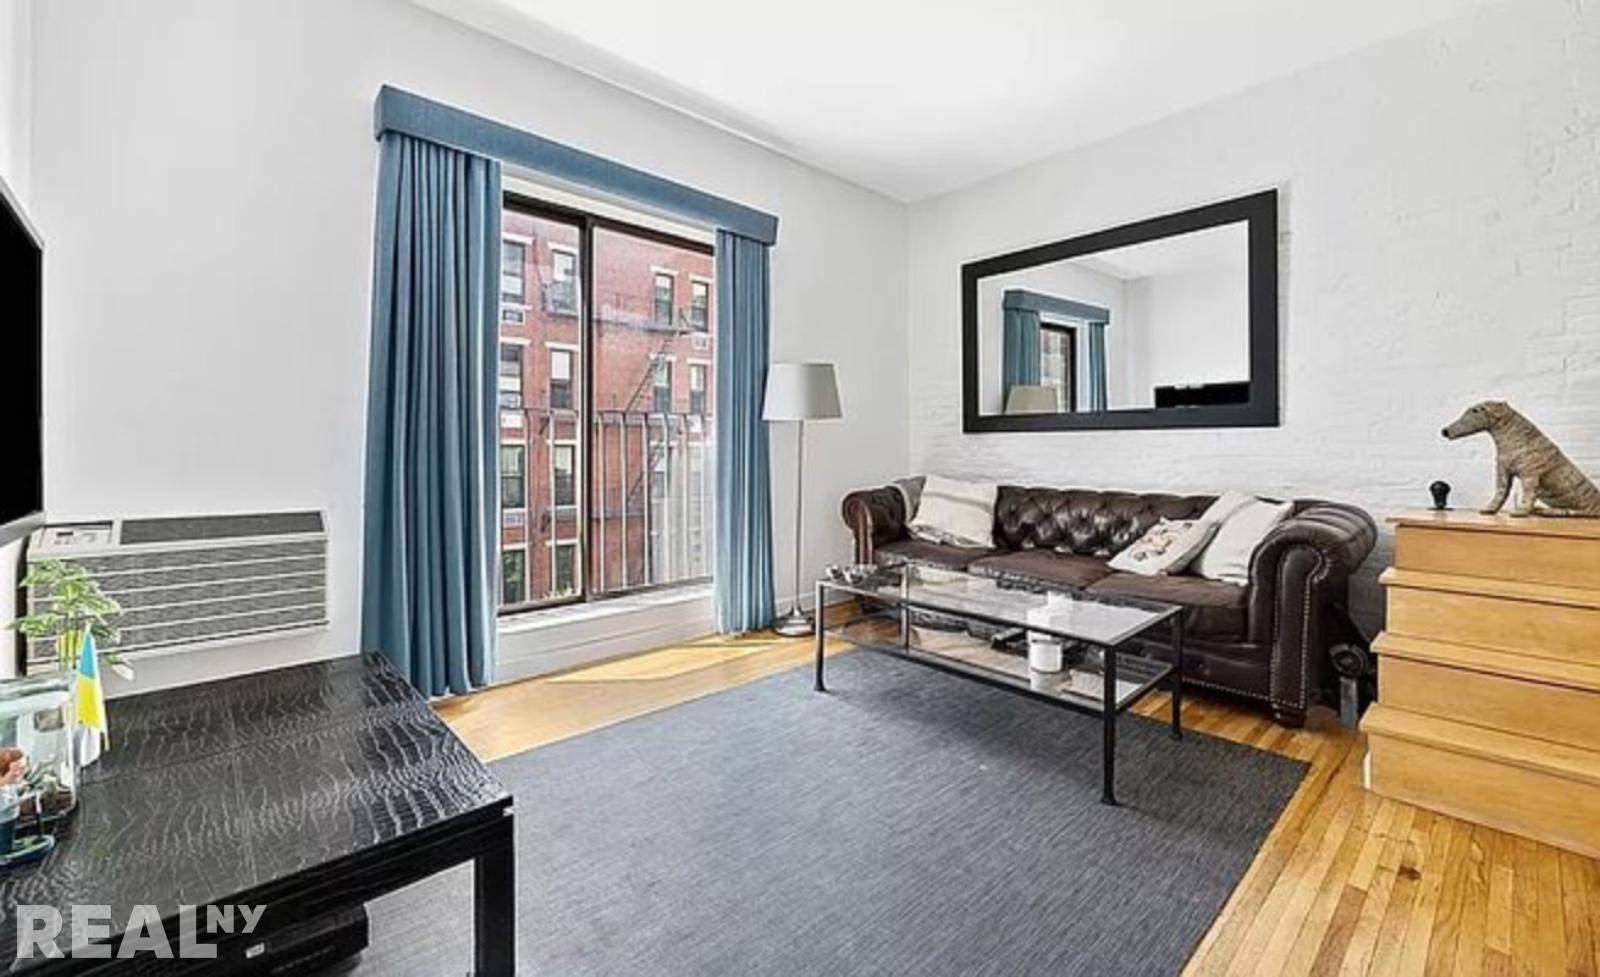 2BR DUPLEX PENTHOUSE WITH BEAUTIFUL OUTDOOR SPACE IN THE HEART OF GRAMERCY !